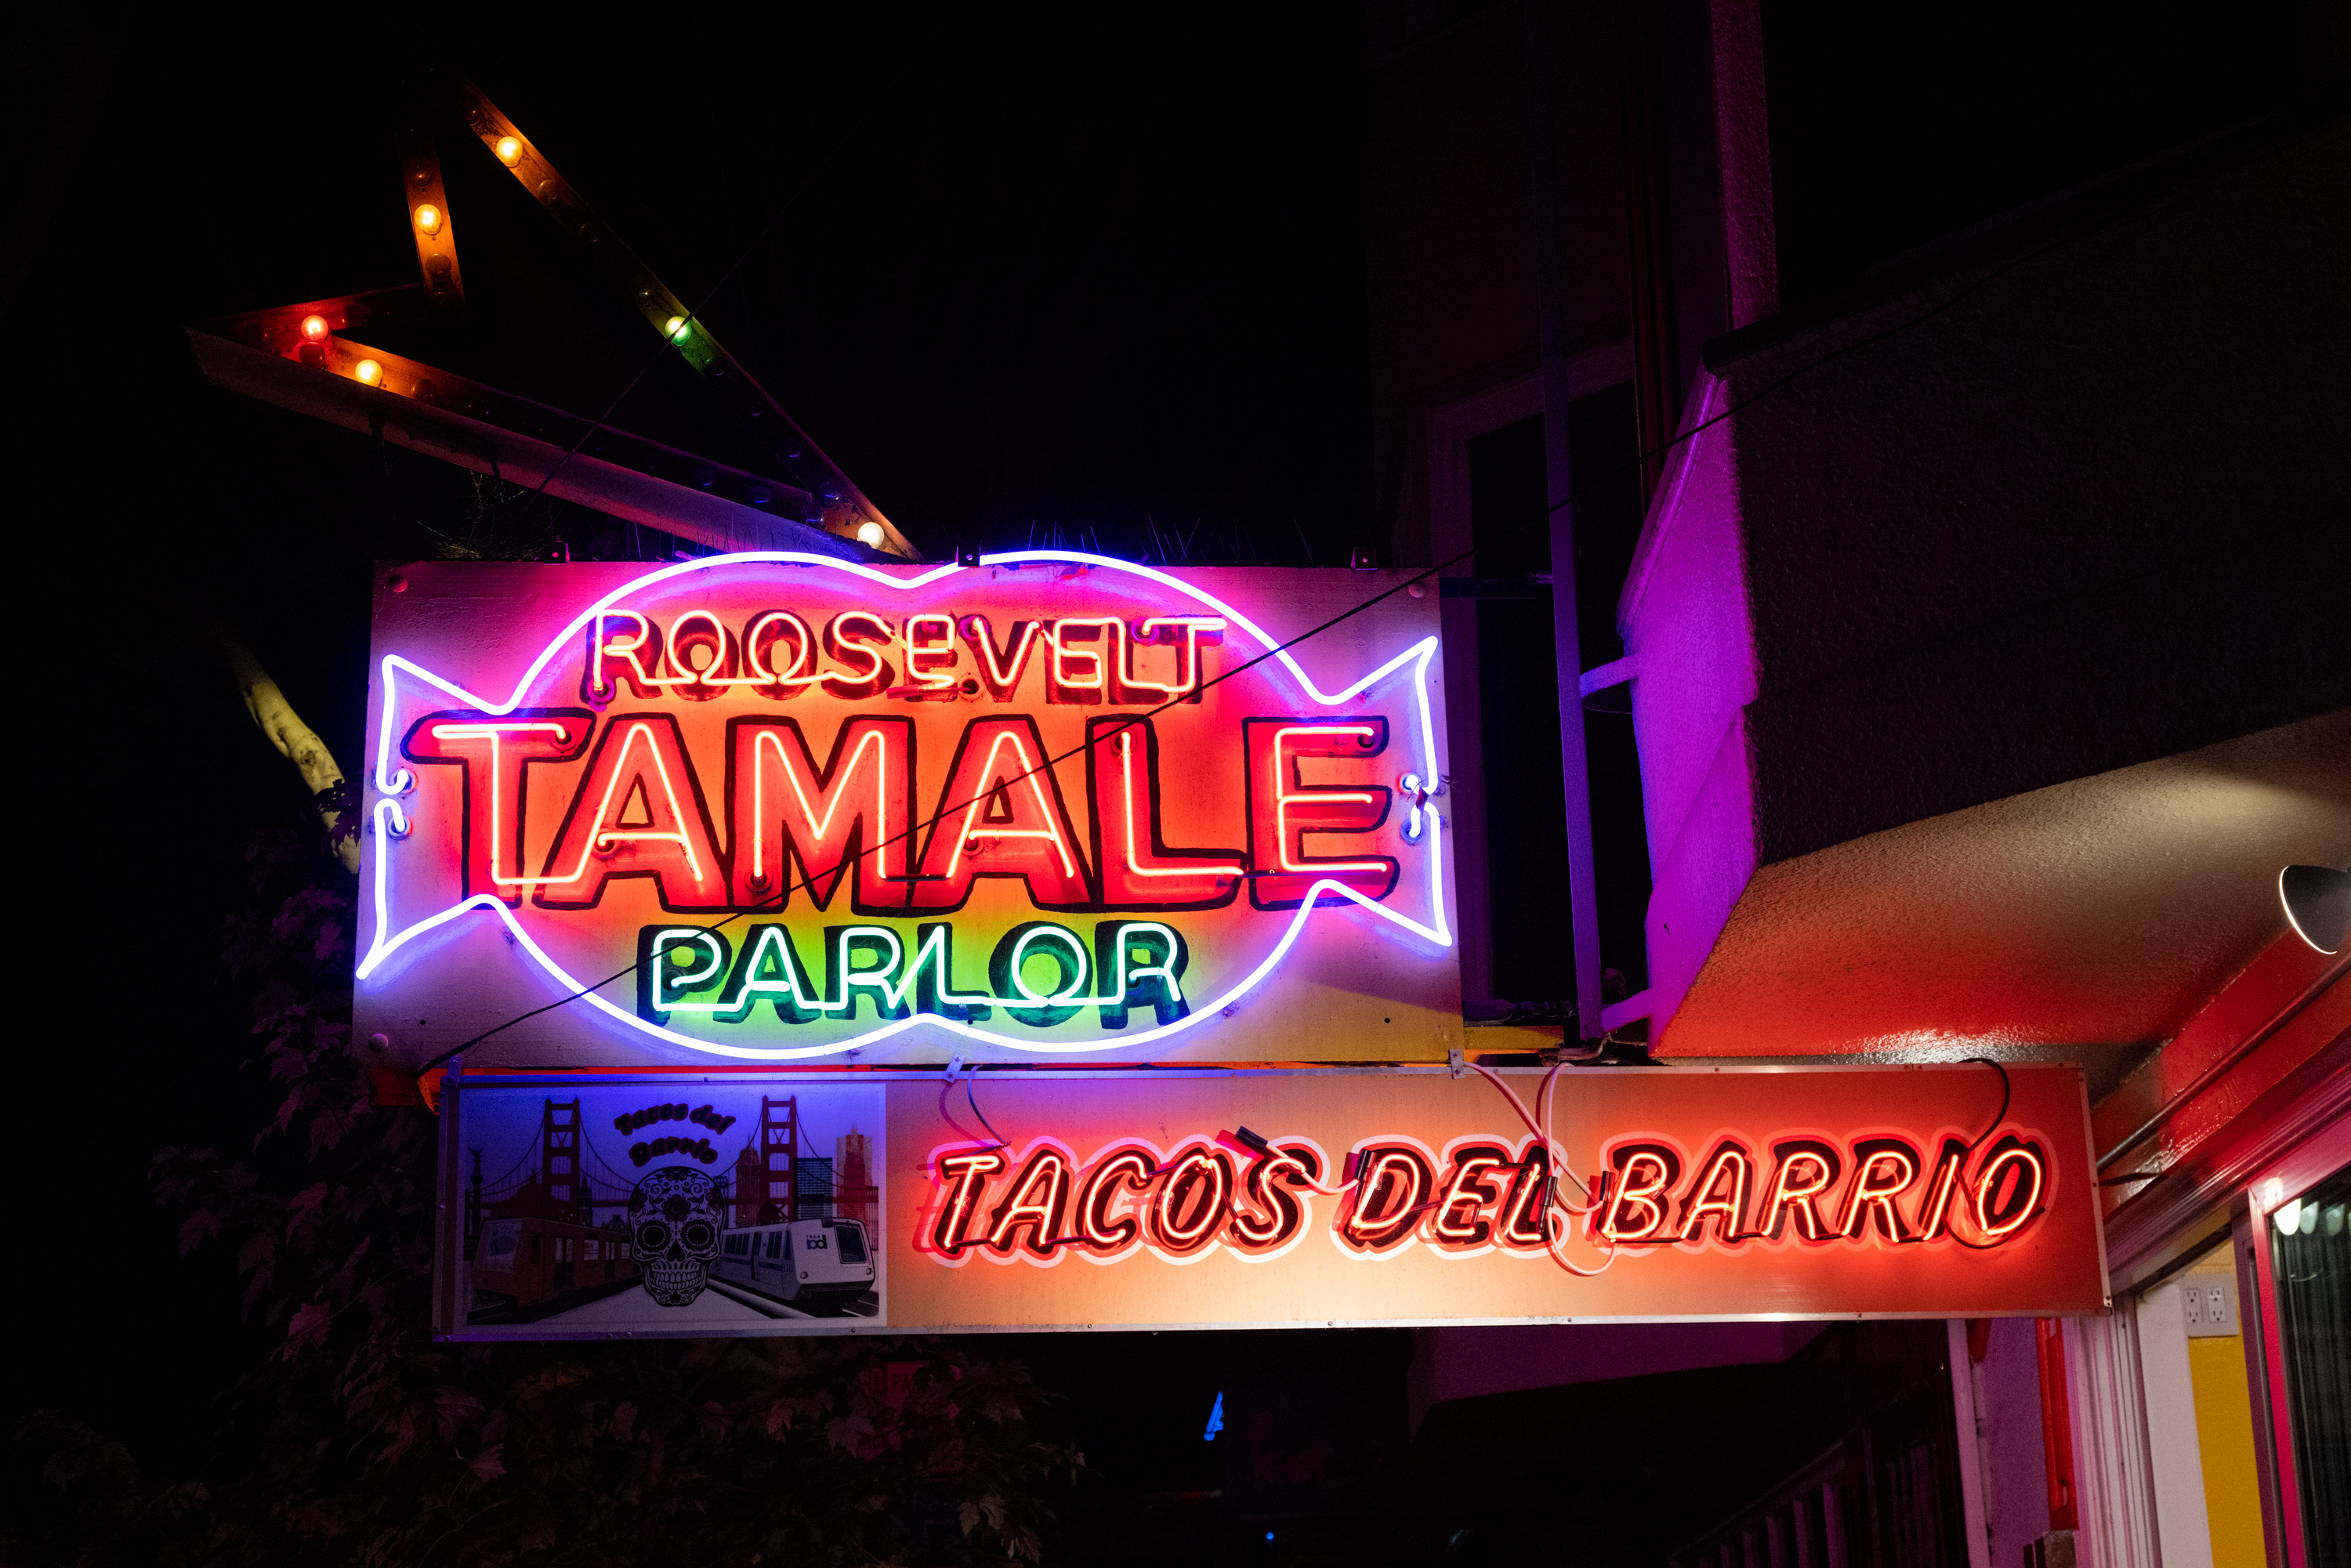 A multi-colored neon sign at night with the words &quot;ROOSEVELT TAMALE PARLOR TACOS DEL BARRIO&quot;